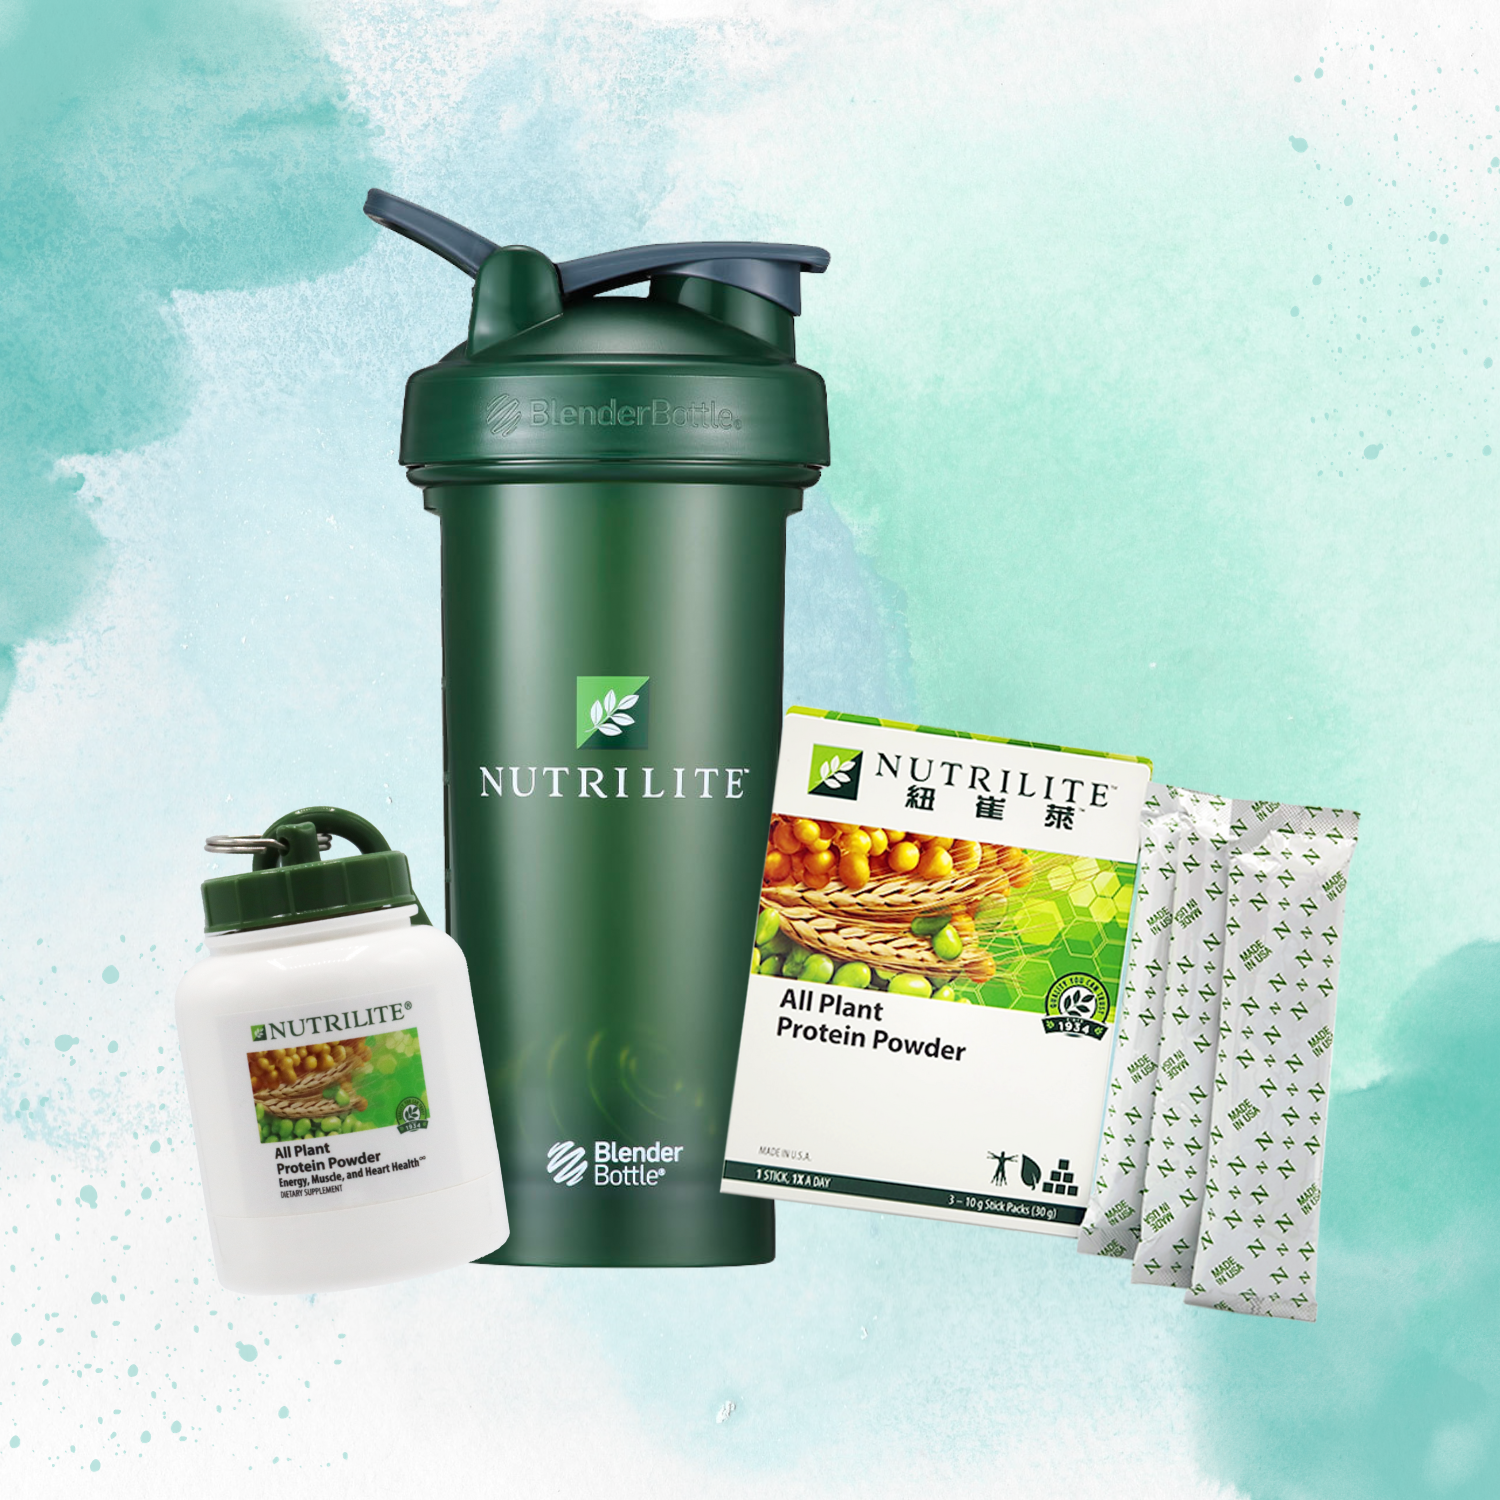 https://media.amway.sg/sys-master/images/hb8/h16/12466331615262/3.png